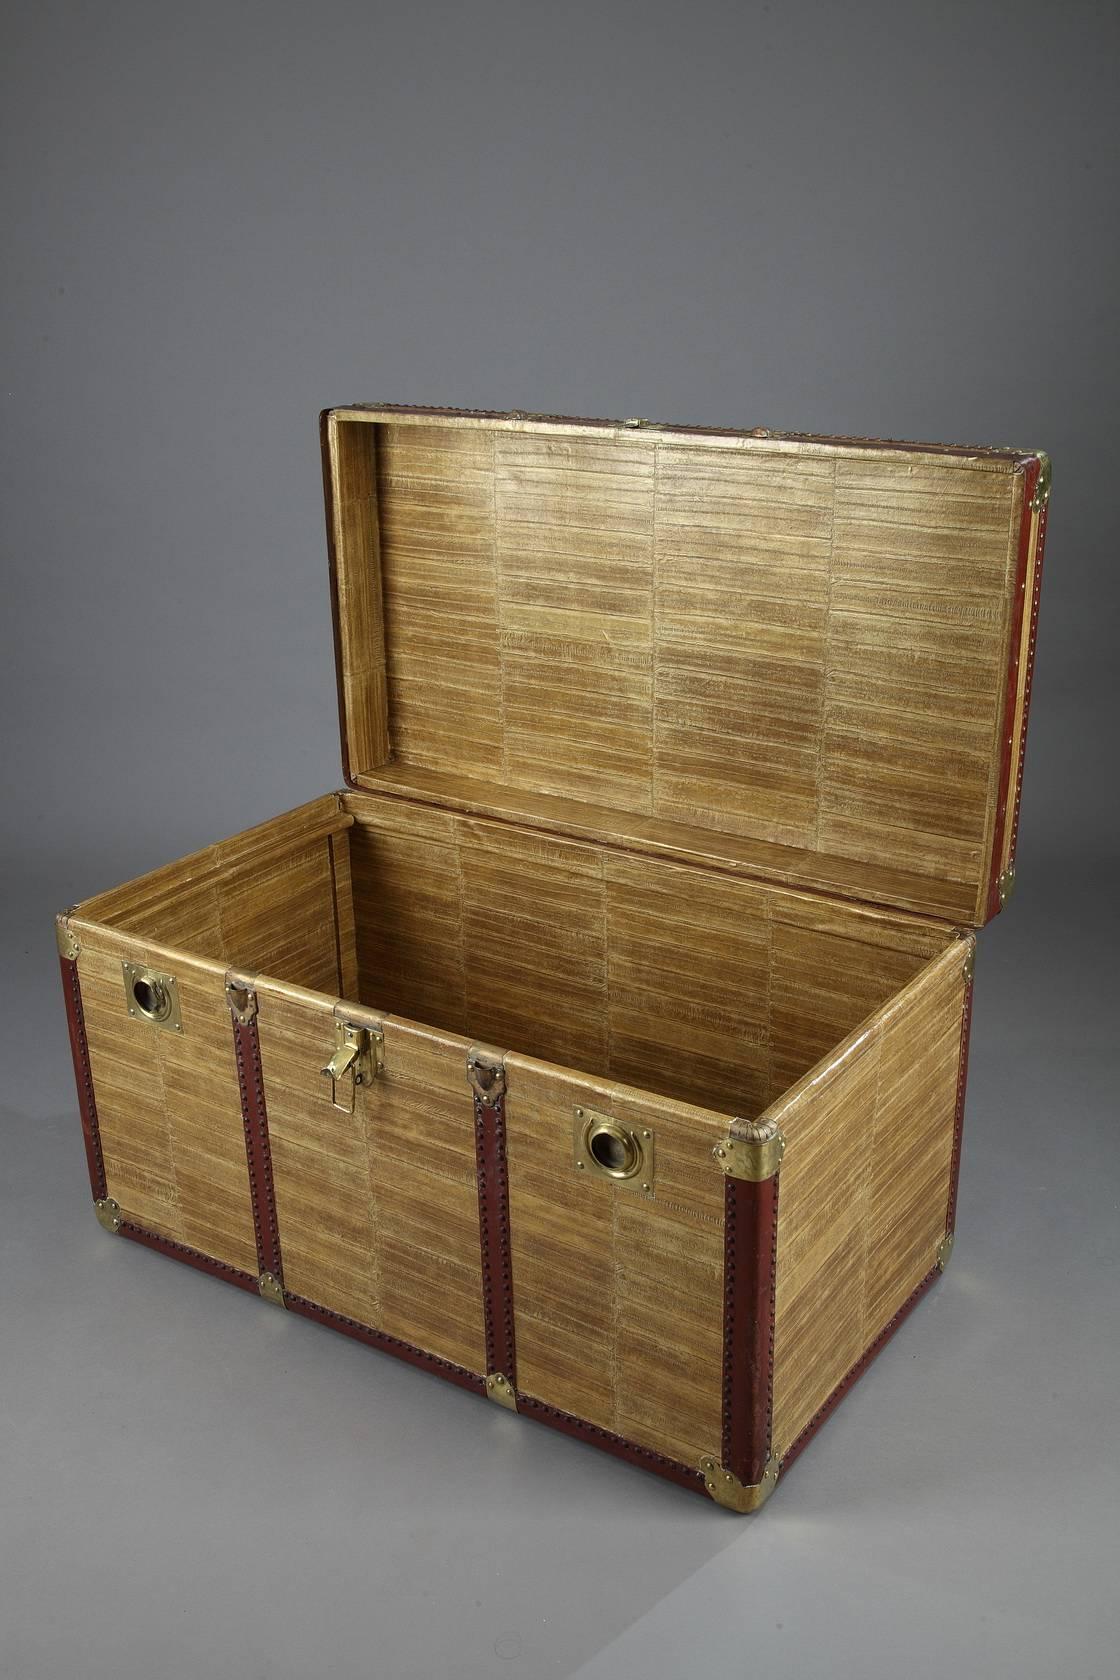 Restored, mint condition. Trunk composed of wood structure with brass mounths.